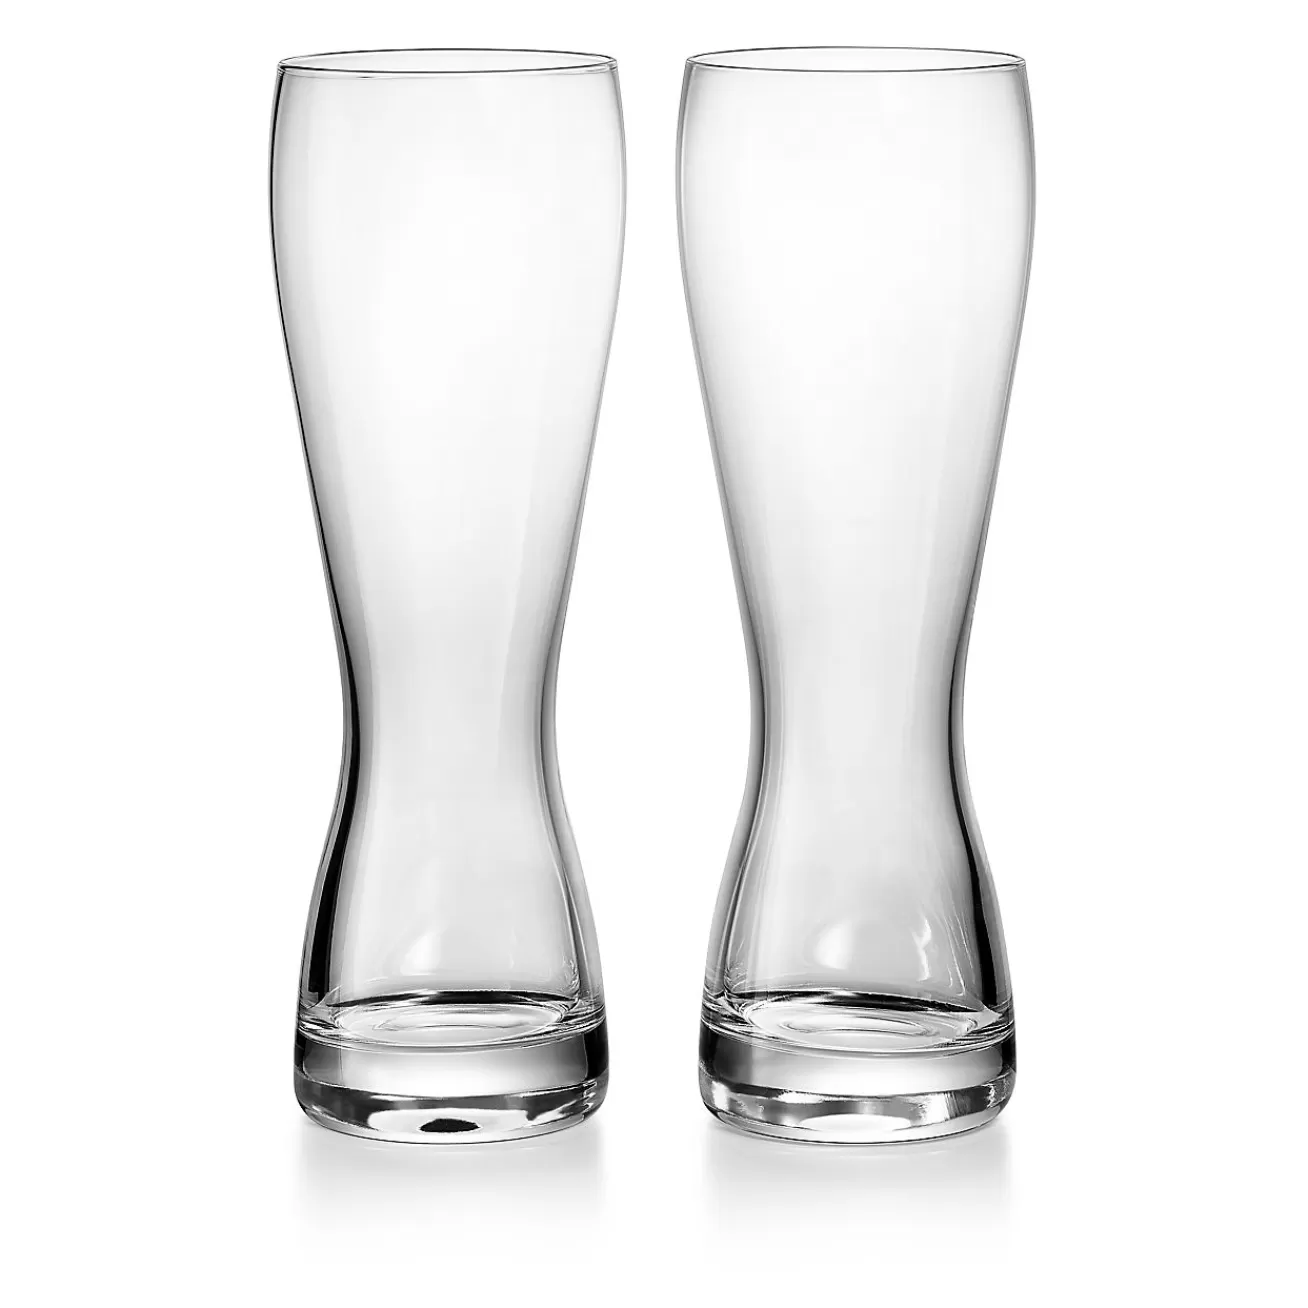 Tiffany & Co. Tiffany Home Essentials Beer Glasses Set of Two, in Crystal Glass | ^ The Home | Housewarming Gifts